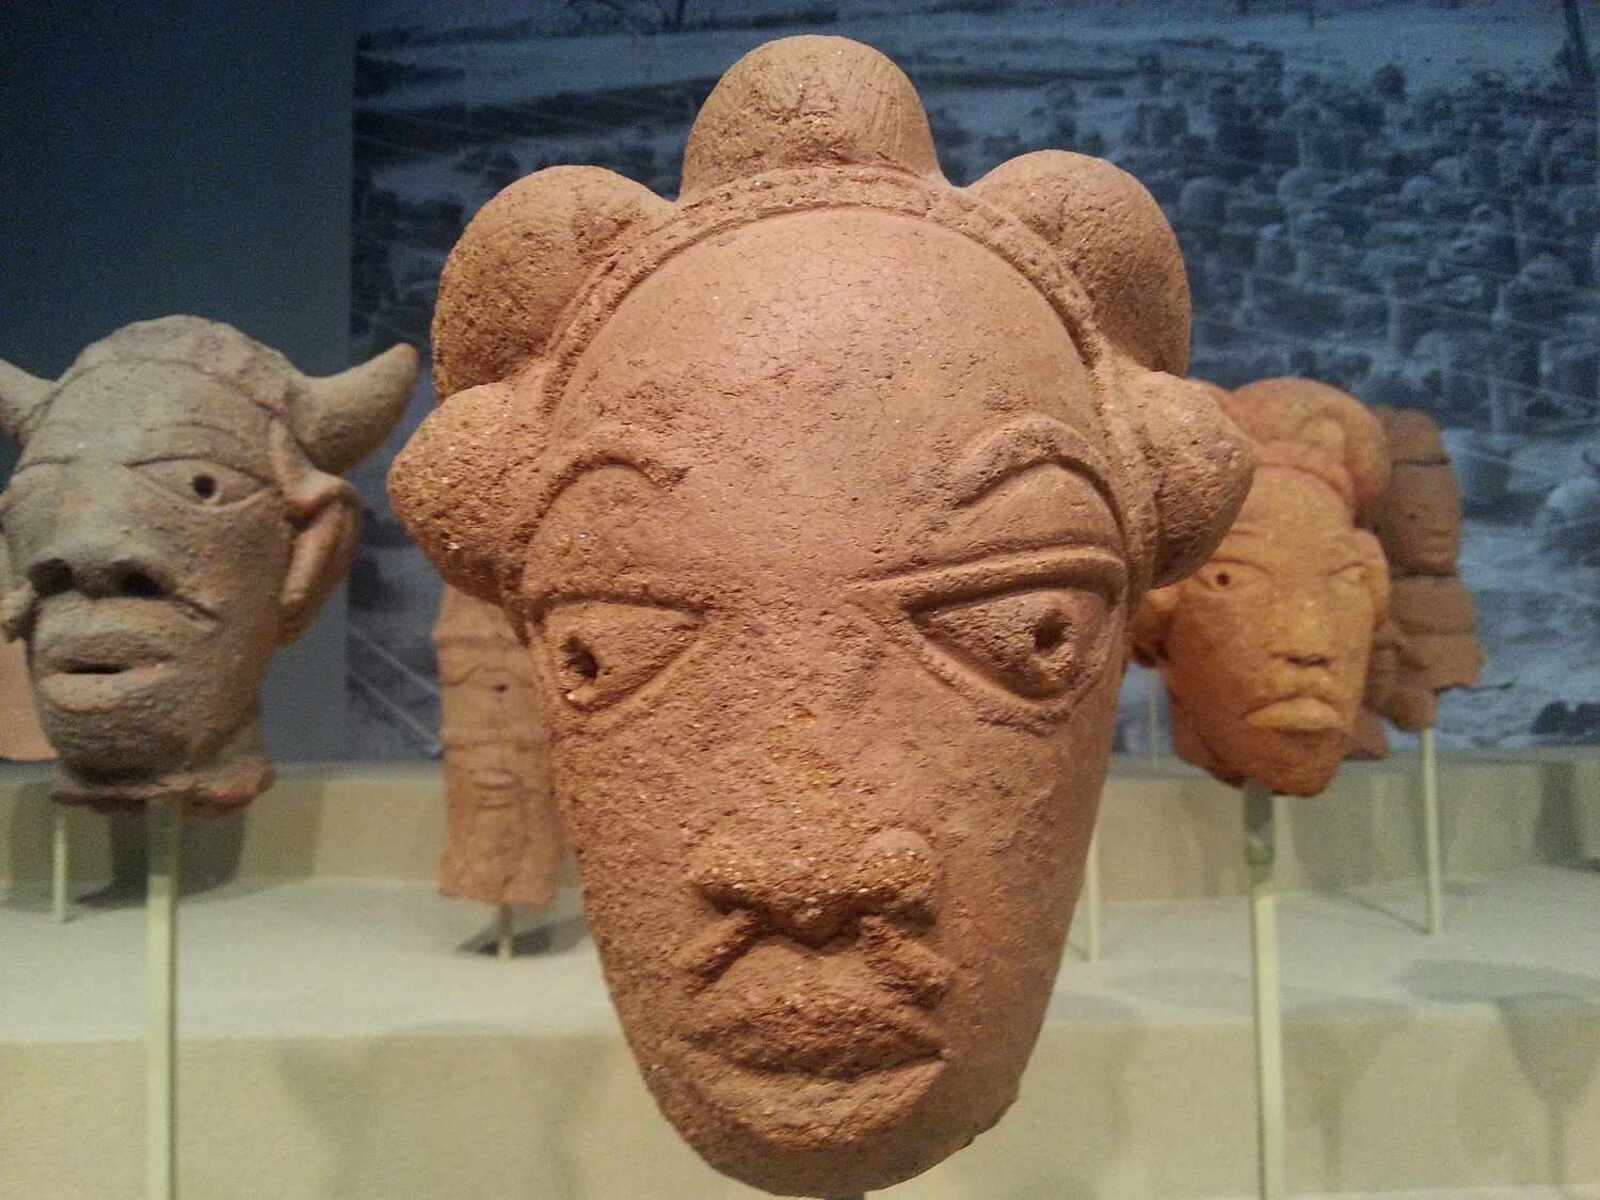 Which People Made The Oldest Known Sculpture From West And Central Africa?